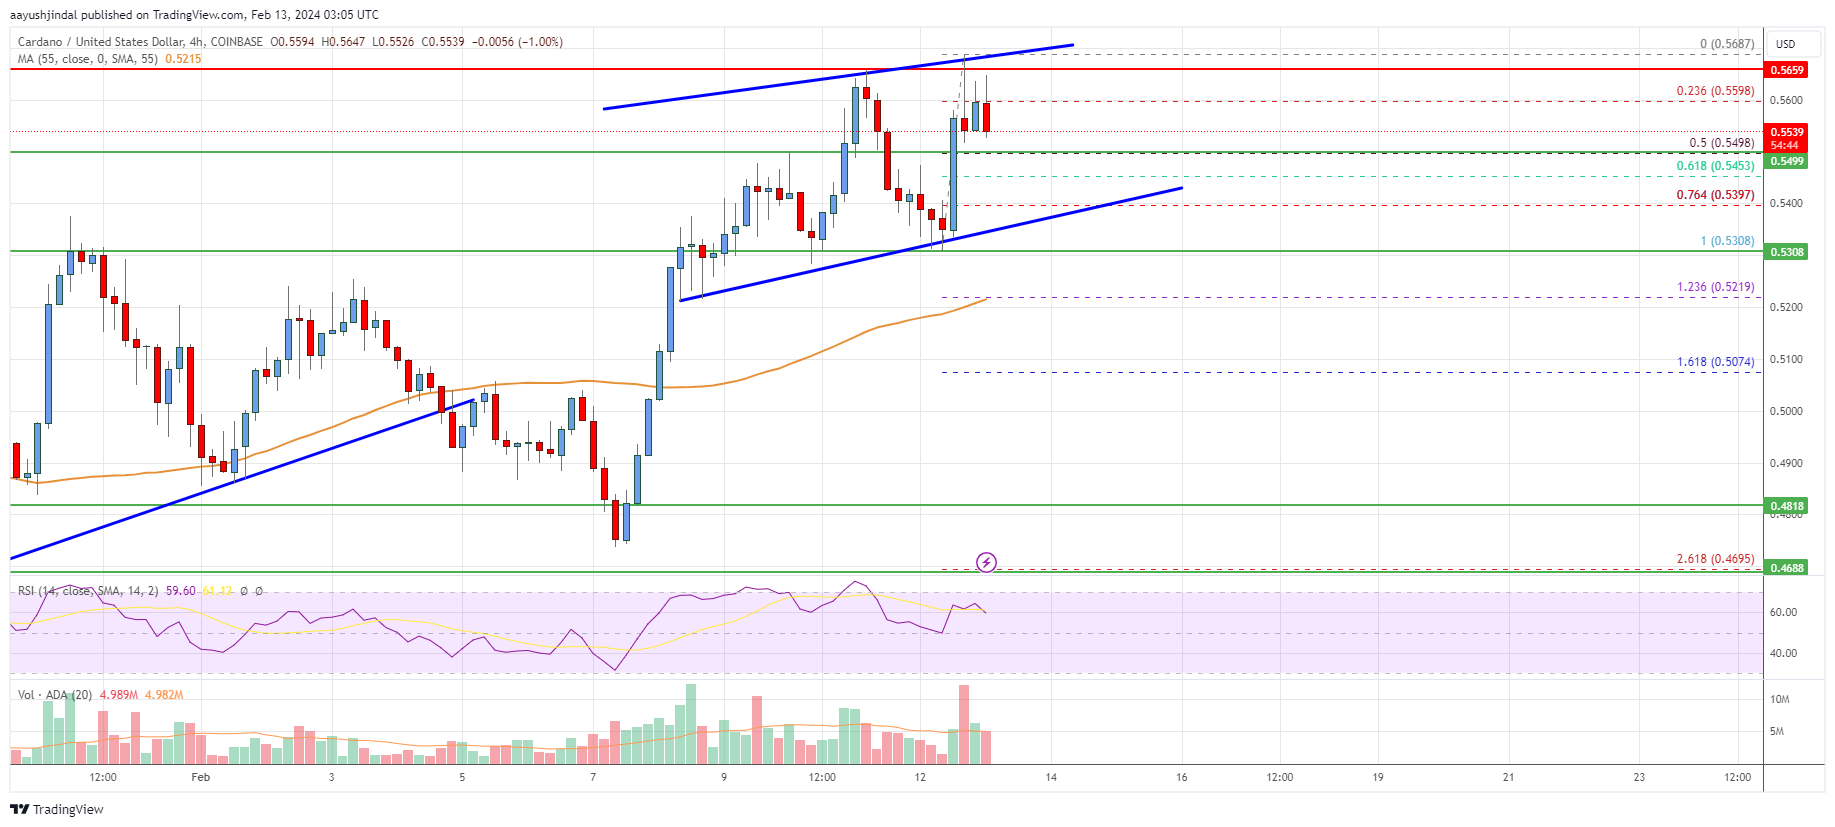 Cardano (ADA) Price Analysis: Signs Suggest Rally To $0.65